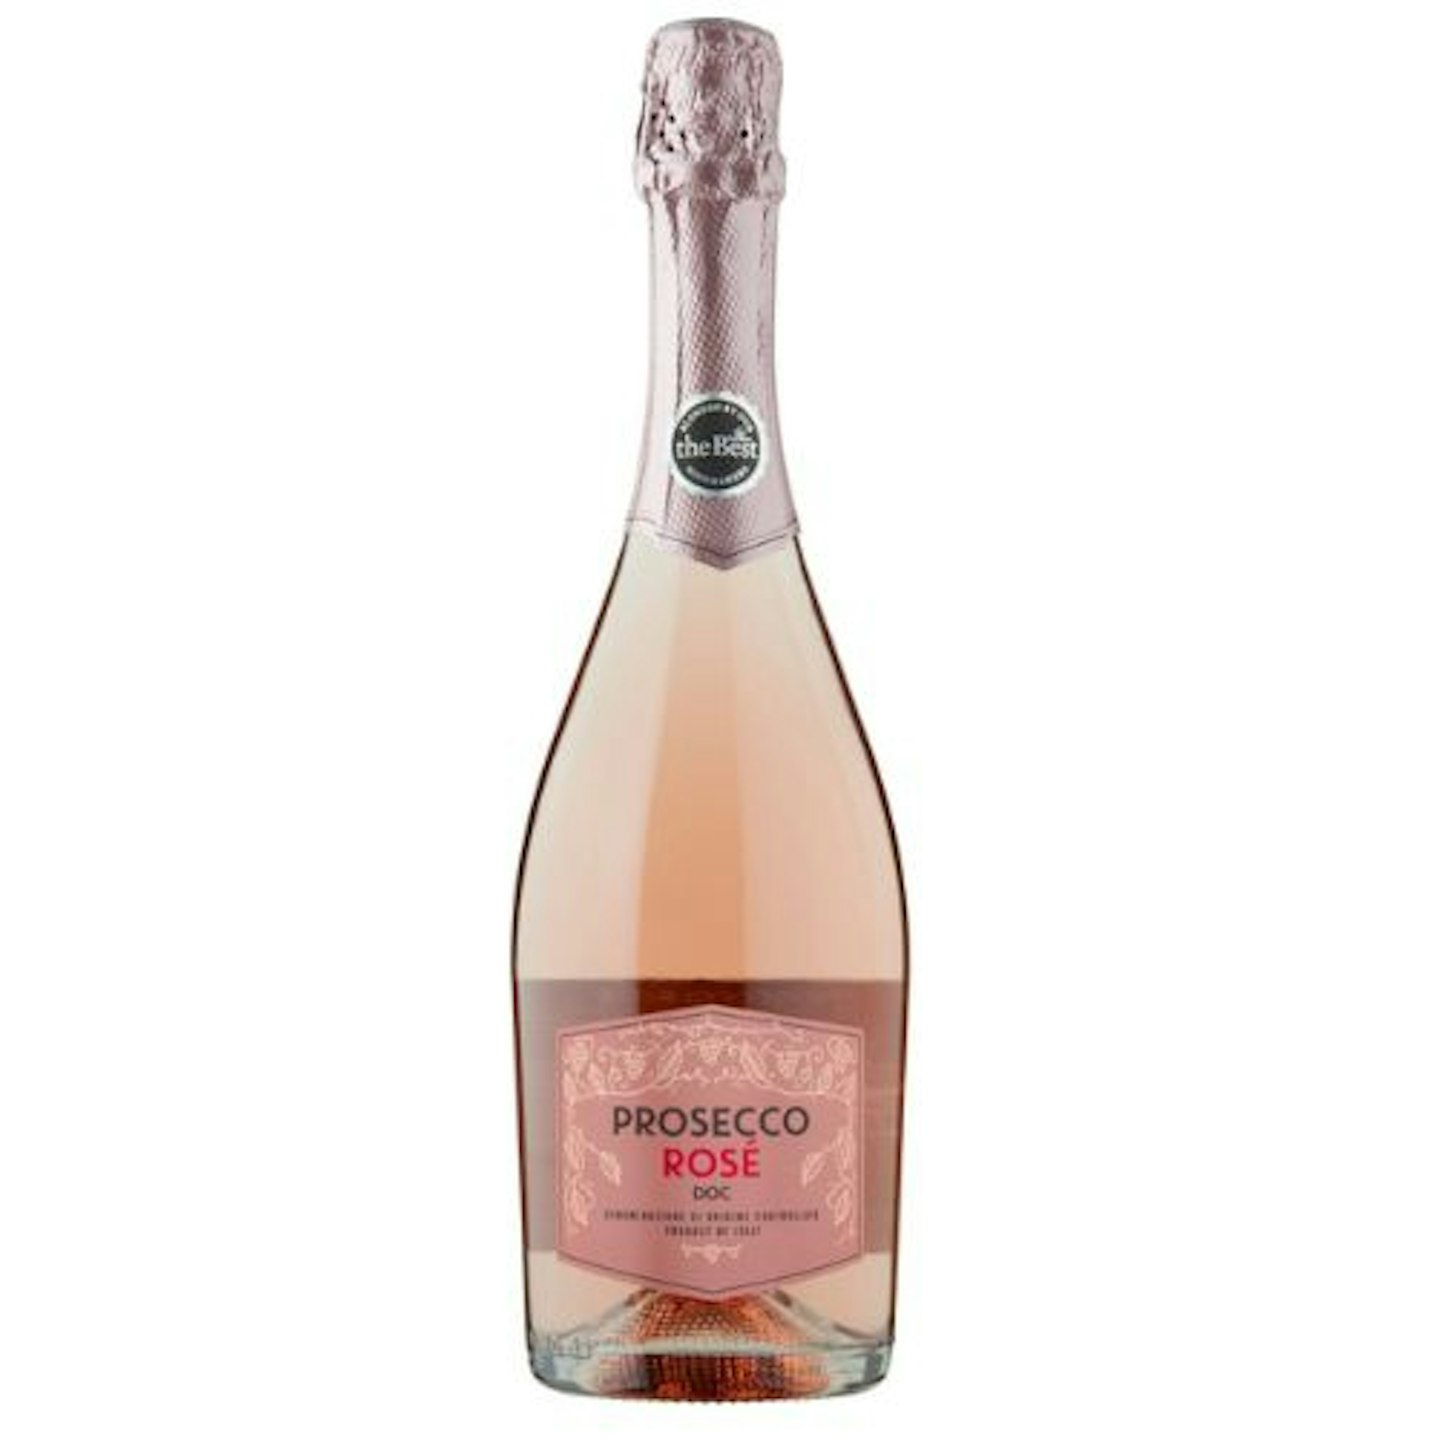 Morrisons The Best Prosecco Rose DOC